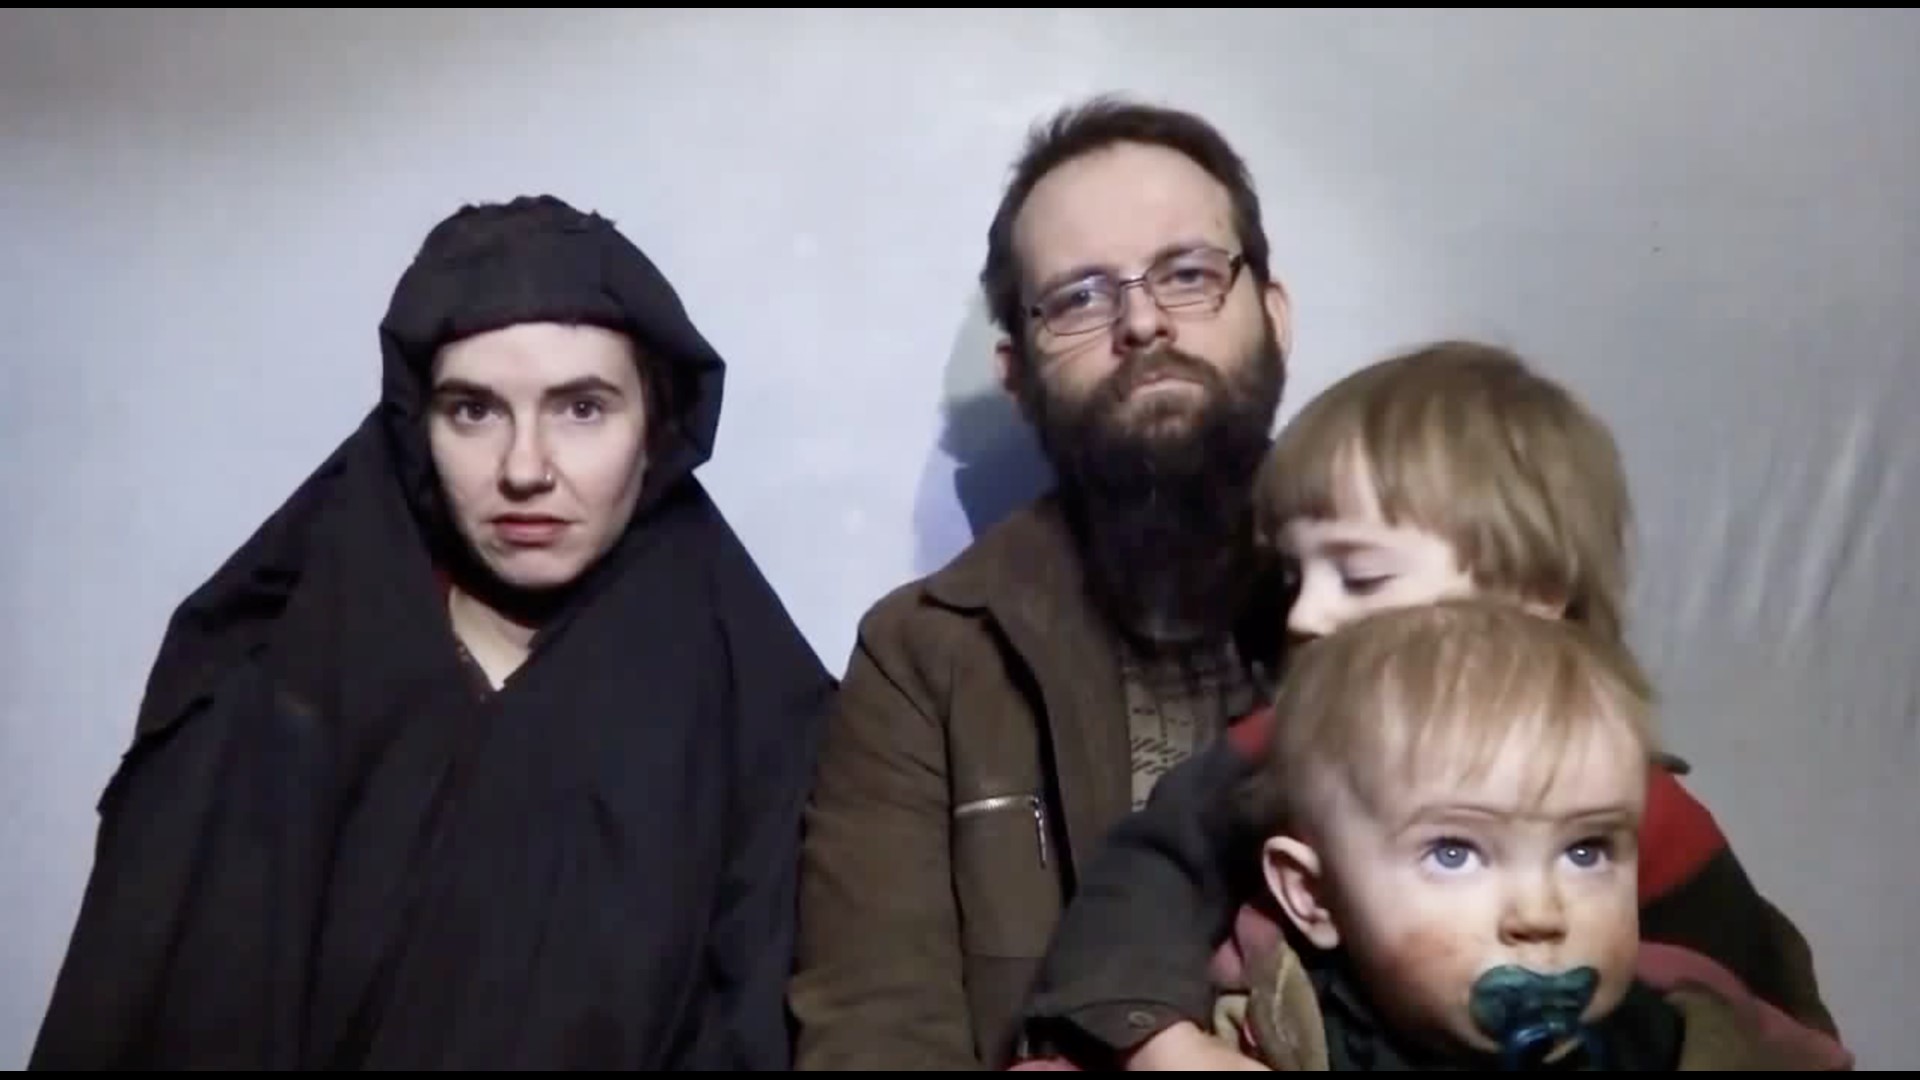 INTERVIEW WITH DAD OF WOMAN IMPRISONED BY TALIBAN